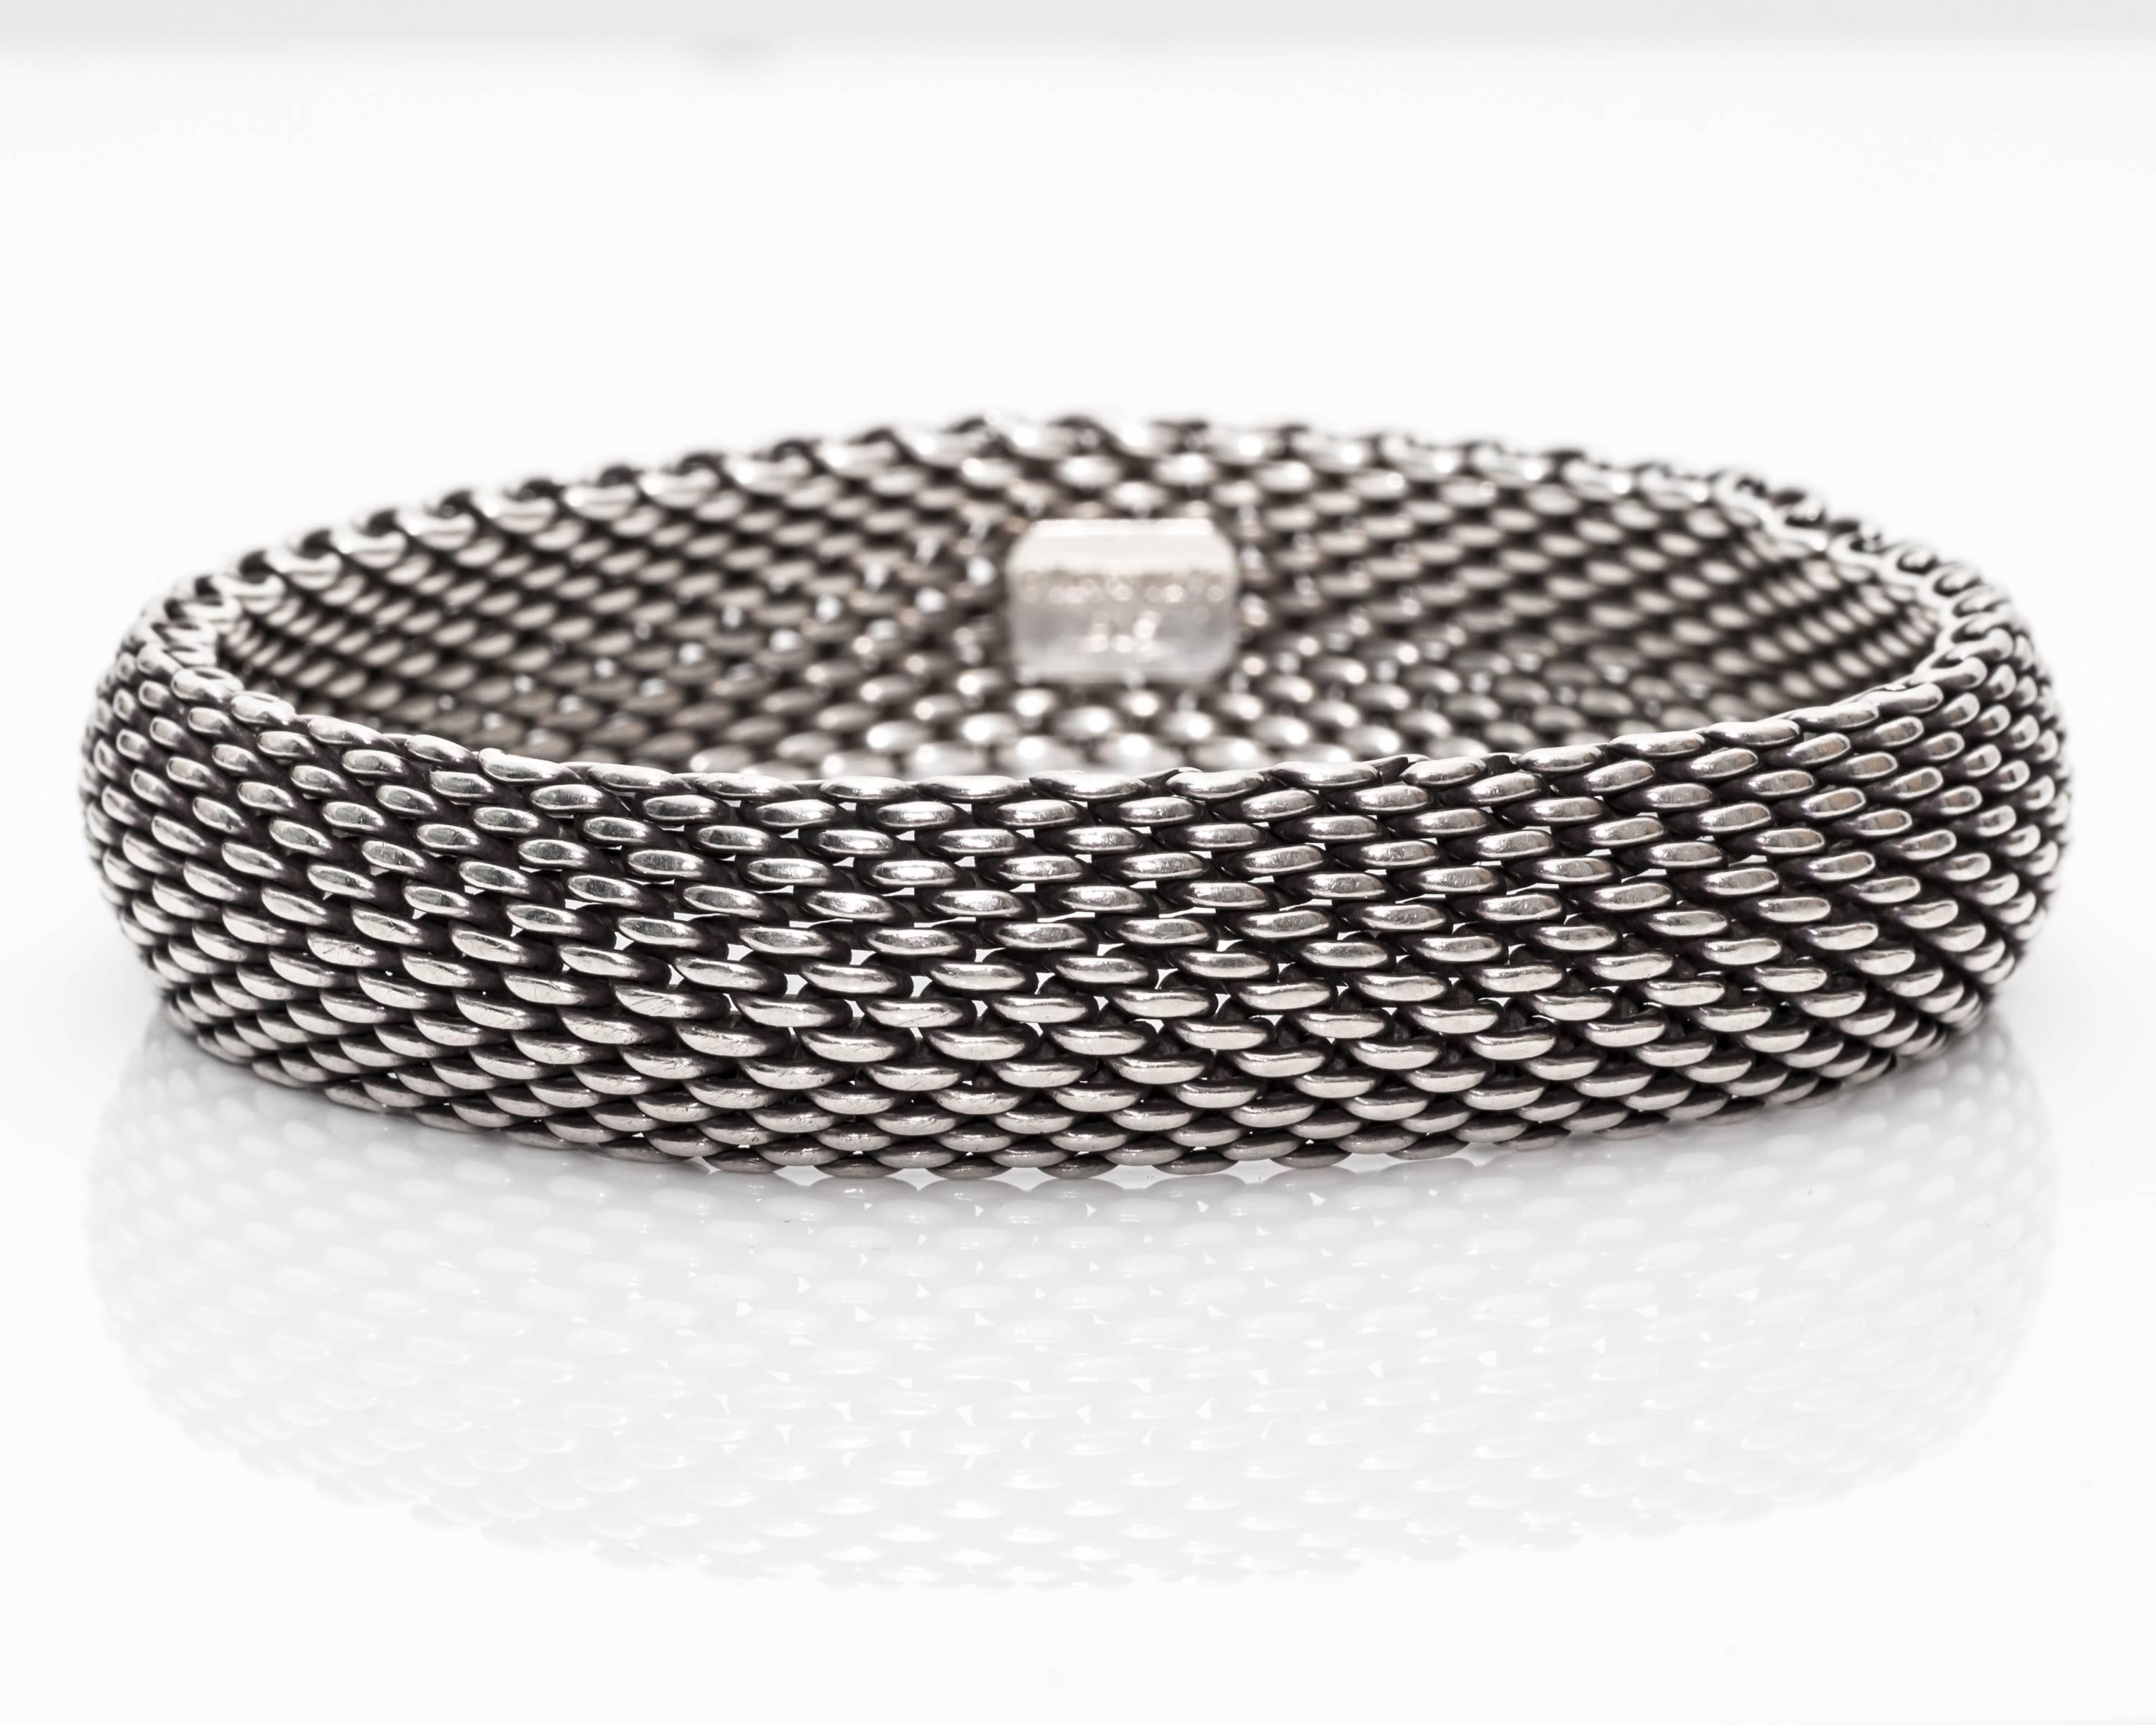 Tiffany & Co. Somerset Bangle/Bracelet 
Wide Style (15 millimeter) Mesh Chain Appearance
Fits 7 Inch Wrist / Large Wrist
One Solid Piece, Slides On & Off
Hallmarked "TIFFANY & CO" and "925" on the Inside
Comes with